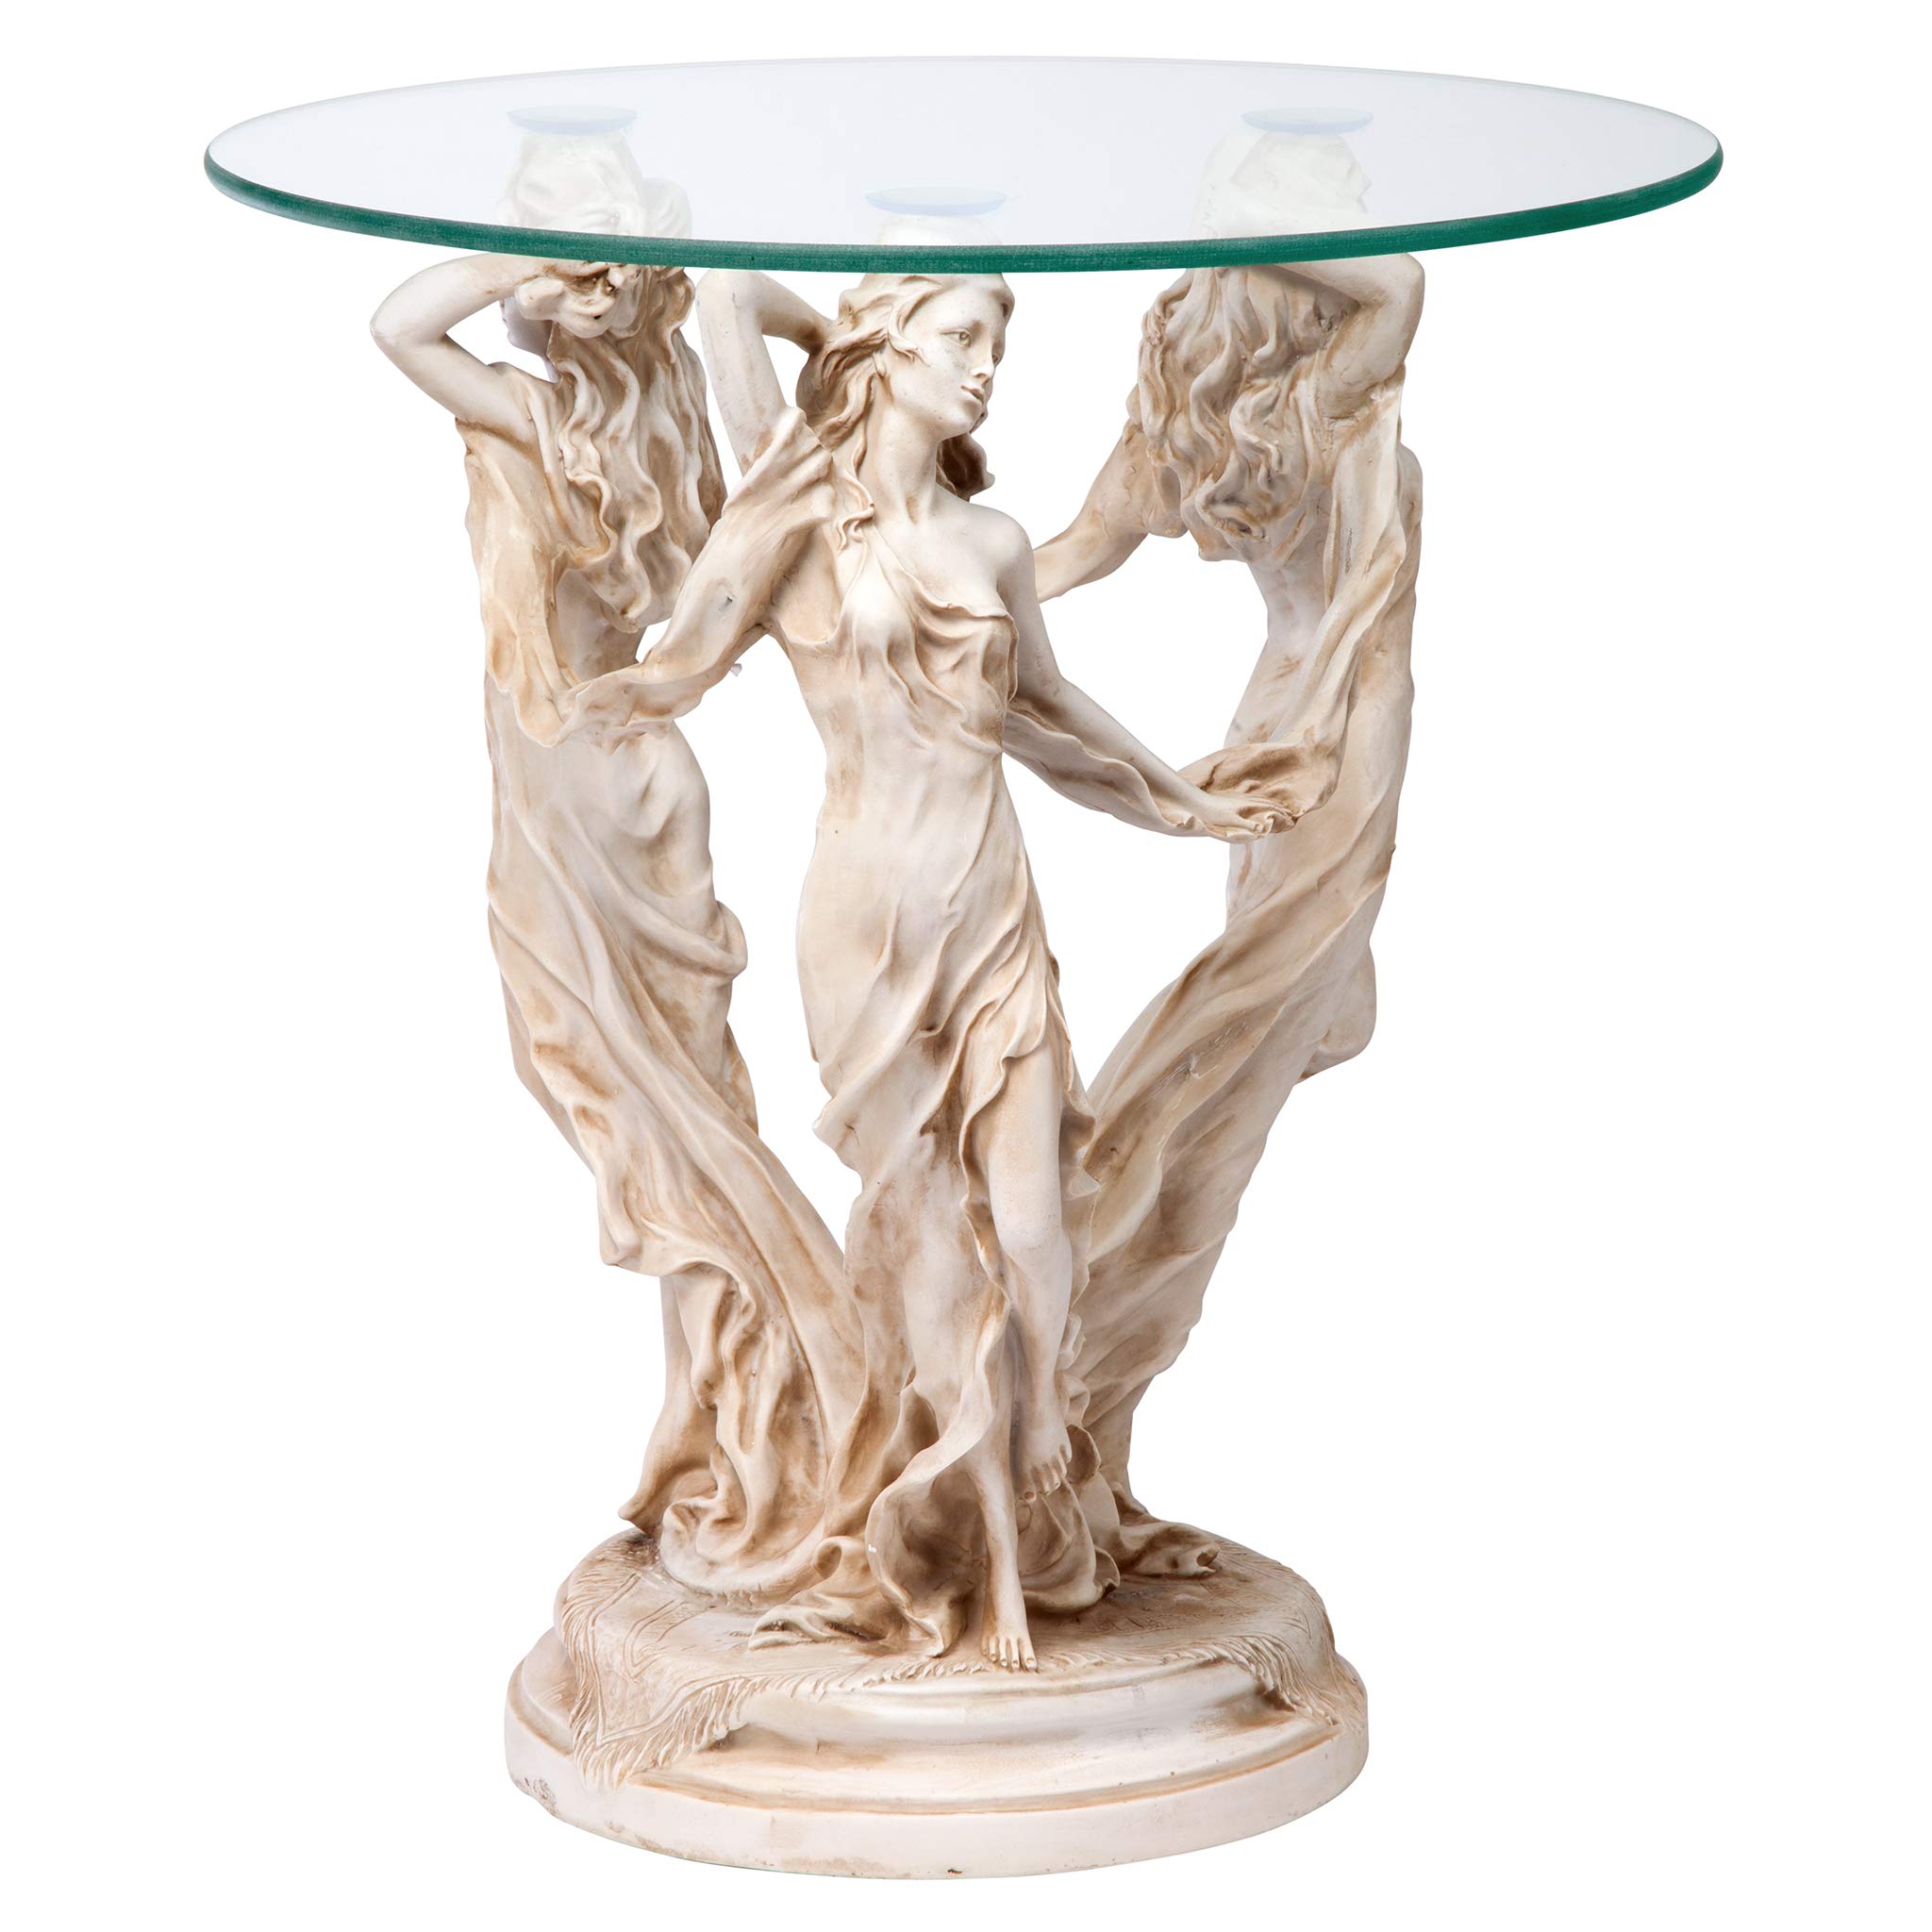 Design Toscano The Greek Muses Classic Glass-Topped Side Table, 18 Inches Wide, 18 Inches Deep, 20 Inches High, Handcast Polyresin, Antique Stone Finish